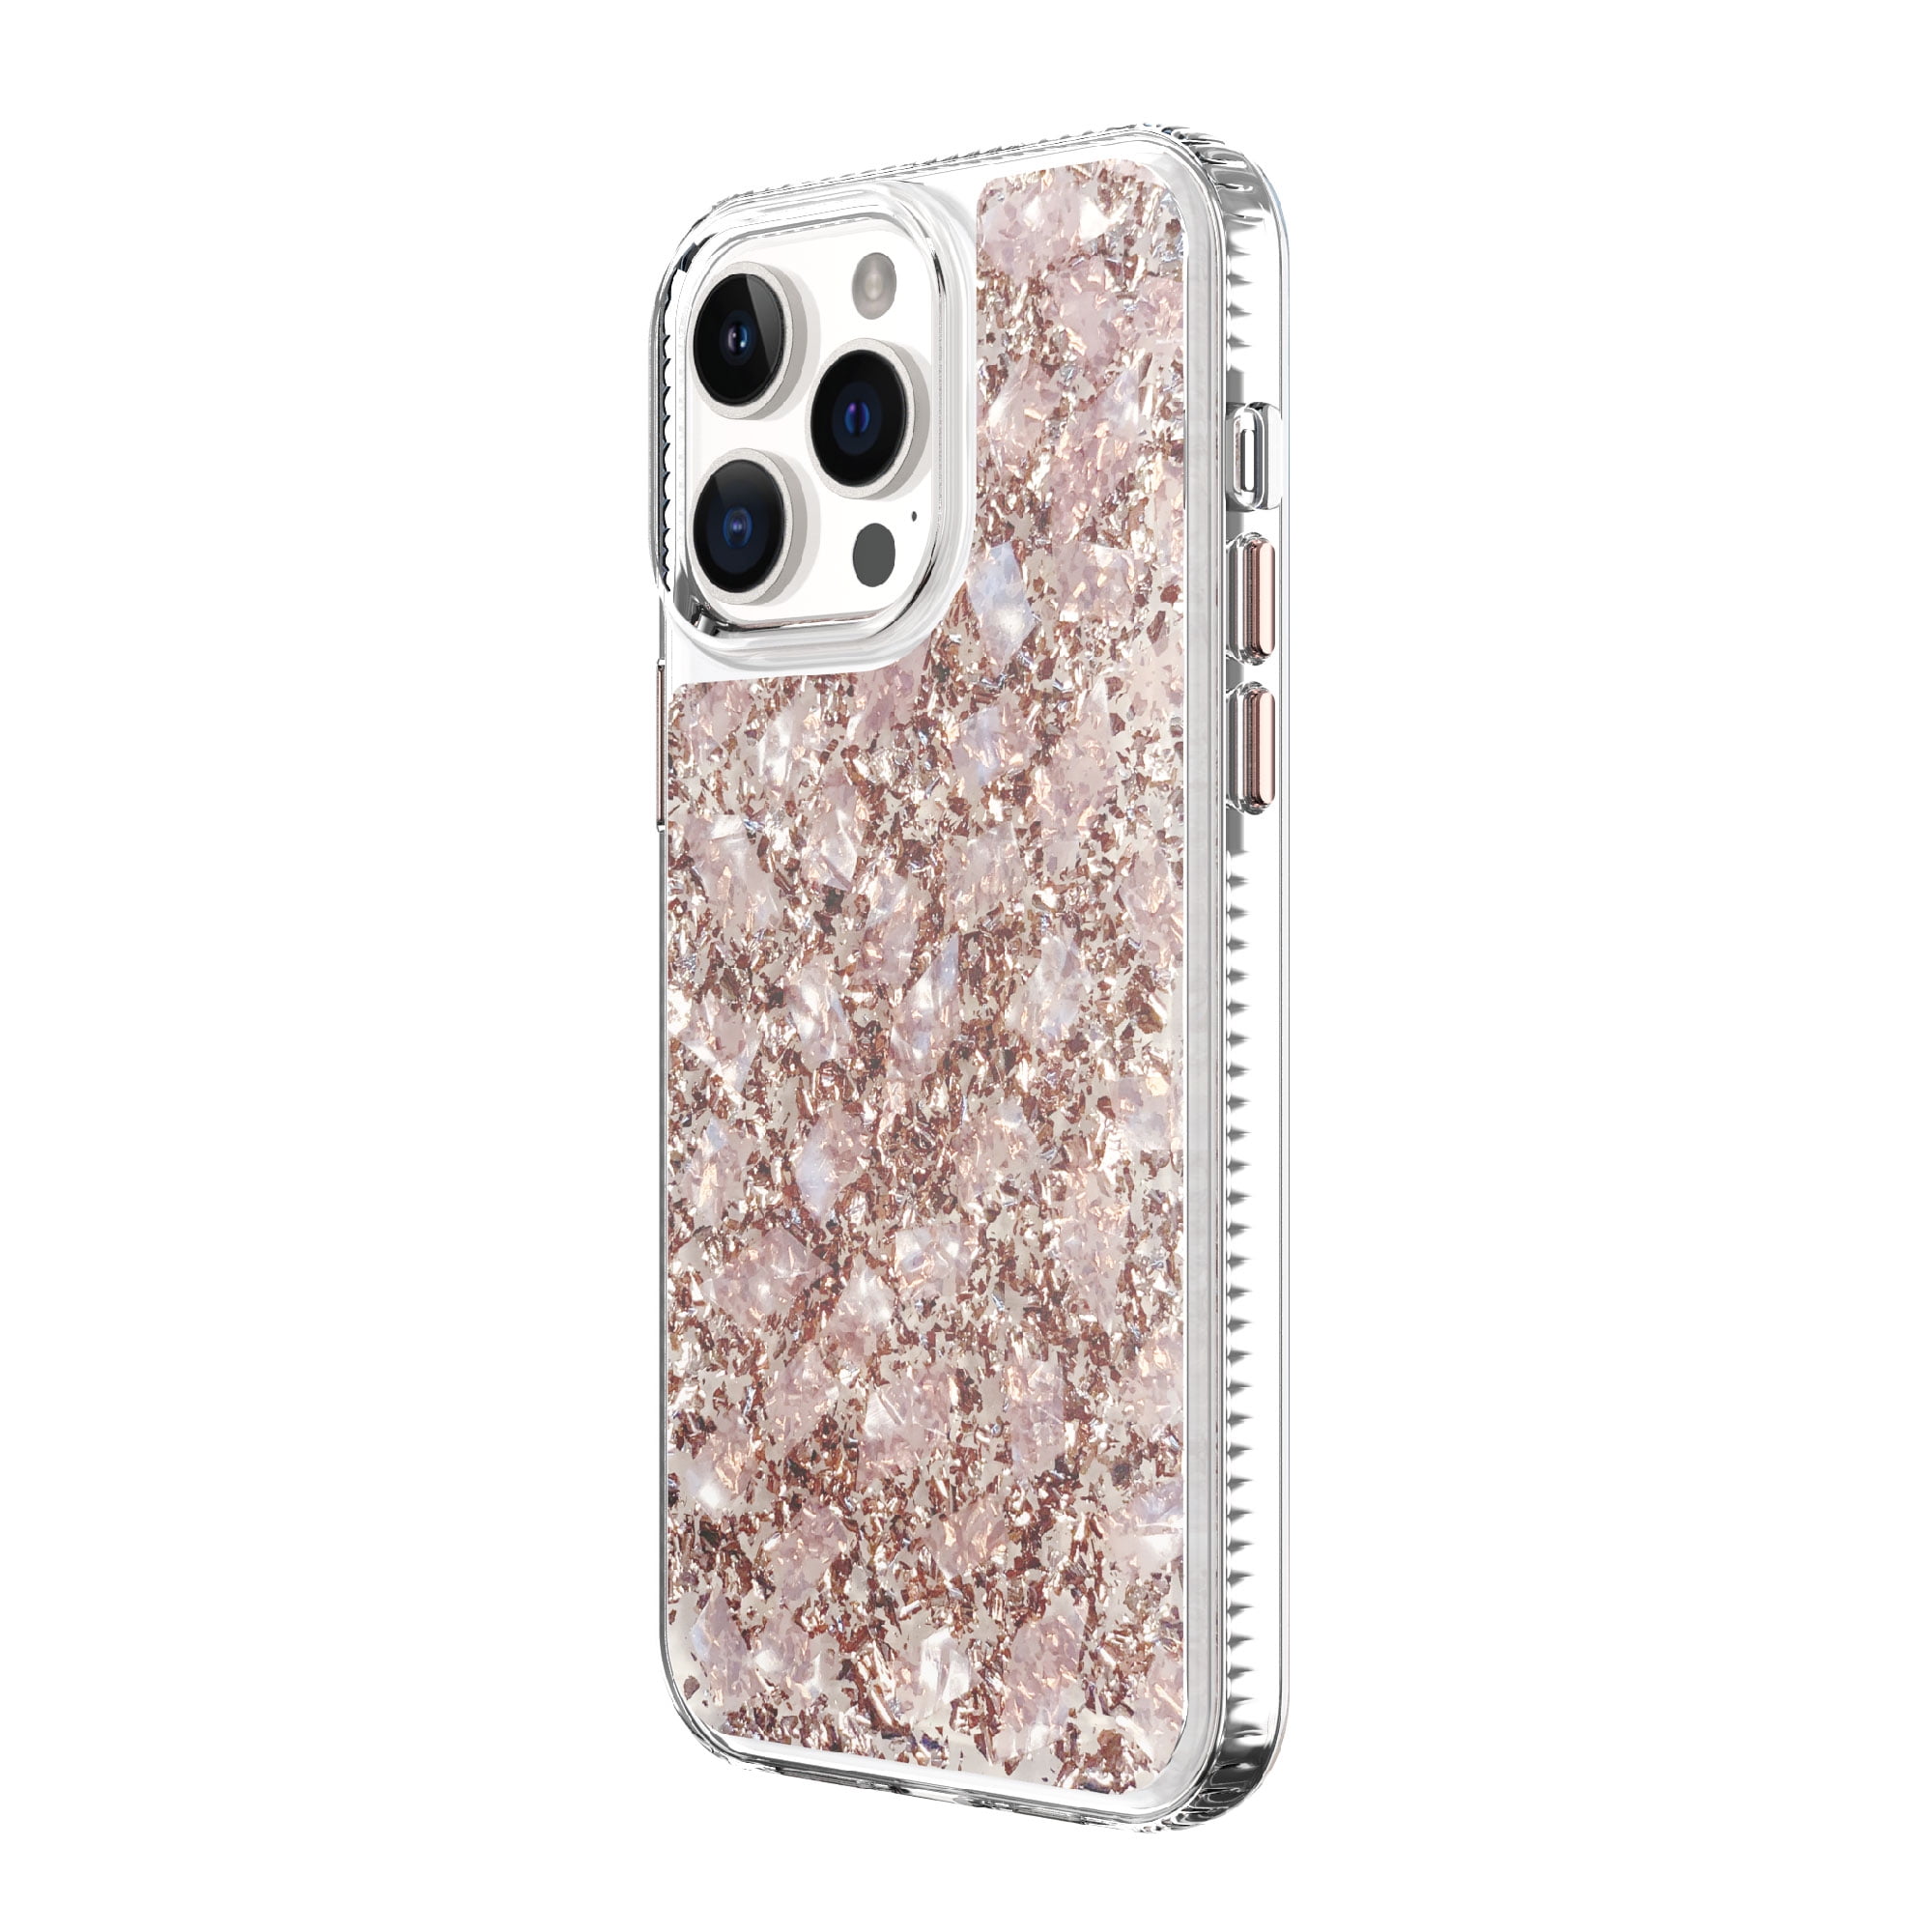 SaharaCase - Hard Shell Series Case for Apple iPhone 12 Pro Max - Clear Rose Gold